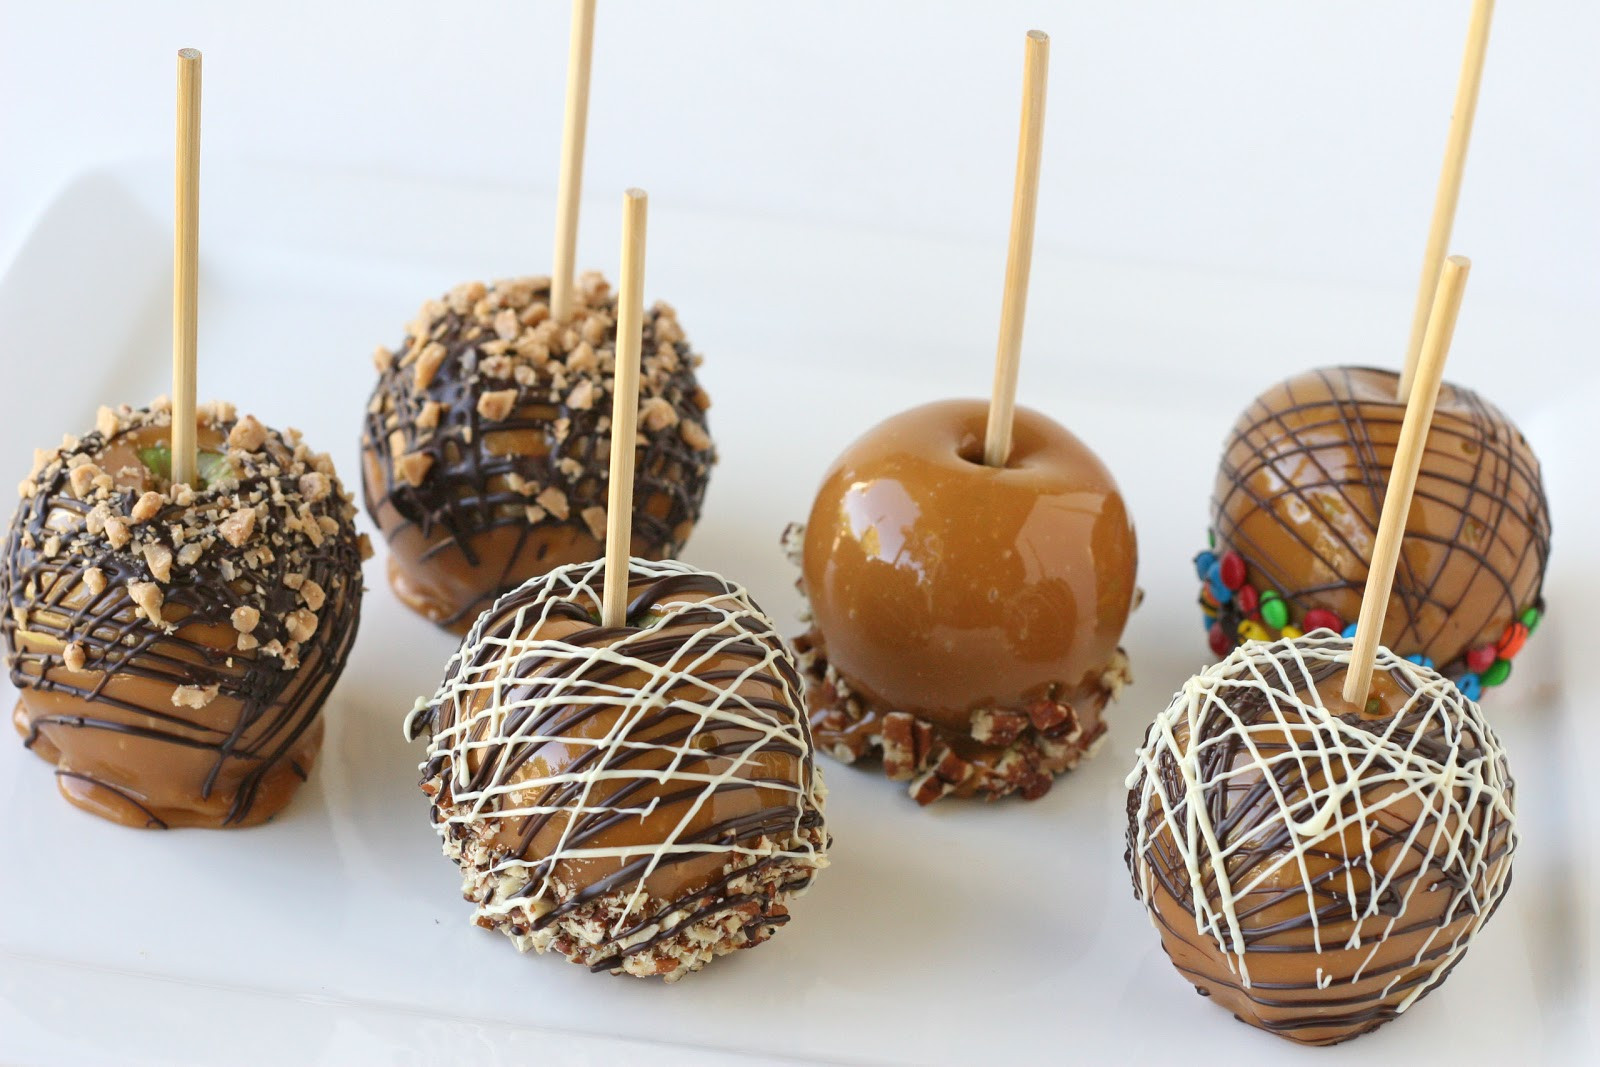 Gourmet Caramel Apples Best Of How to Make Gourmet Caramel Apples – Glorious Treats